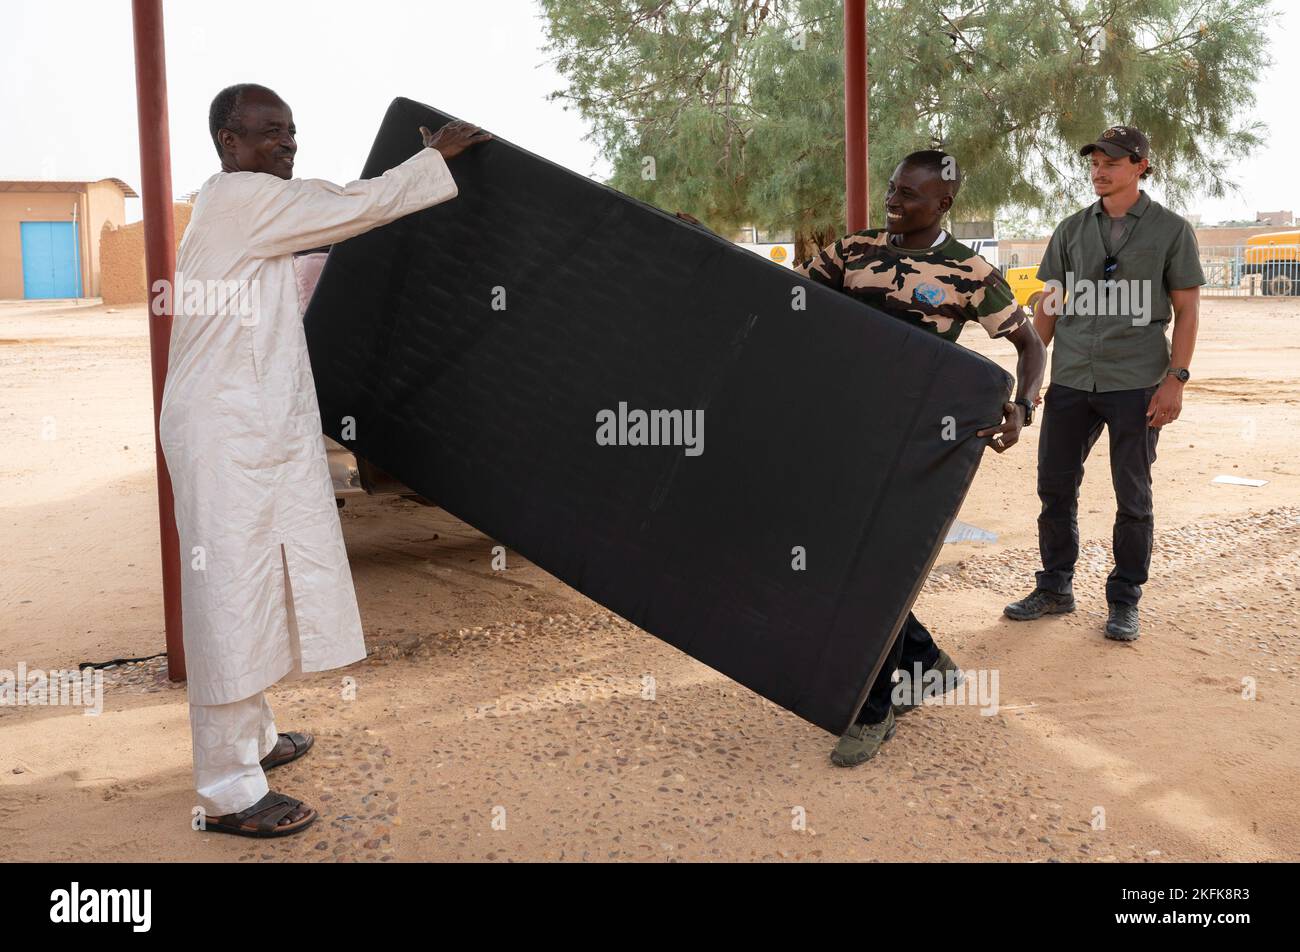 AGADEZ, Niger - Rhissa (left), Agadez Mining School (AMS) superintendent, accepts five donated mattresses from Adjutant Nadare (right), Niger Armed Forces - Affair Civil Militaire (FAN ACM) during a visit to the school in Agadez, Niger, Sept. 22, 2022. The ACM and the 443rd Civil Affairs Battalion donated five twin-size mattresses to allow students to stay at the school compound throughout the week to alleviate travel to and from home. Stock Photo